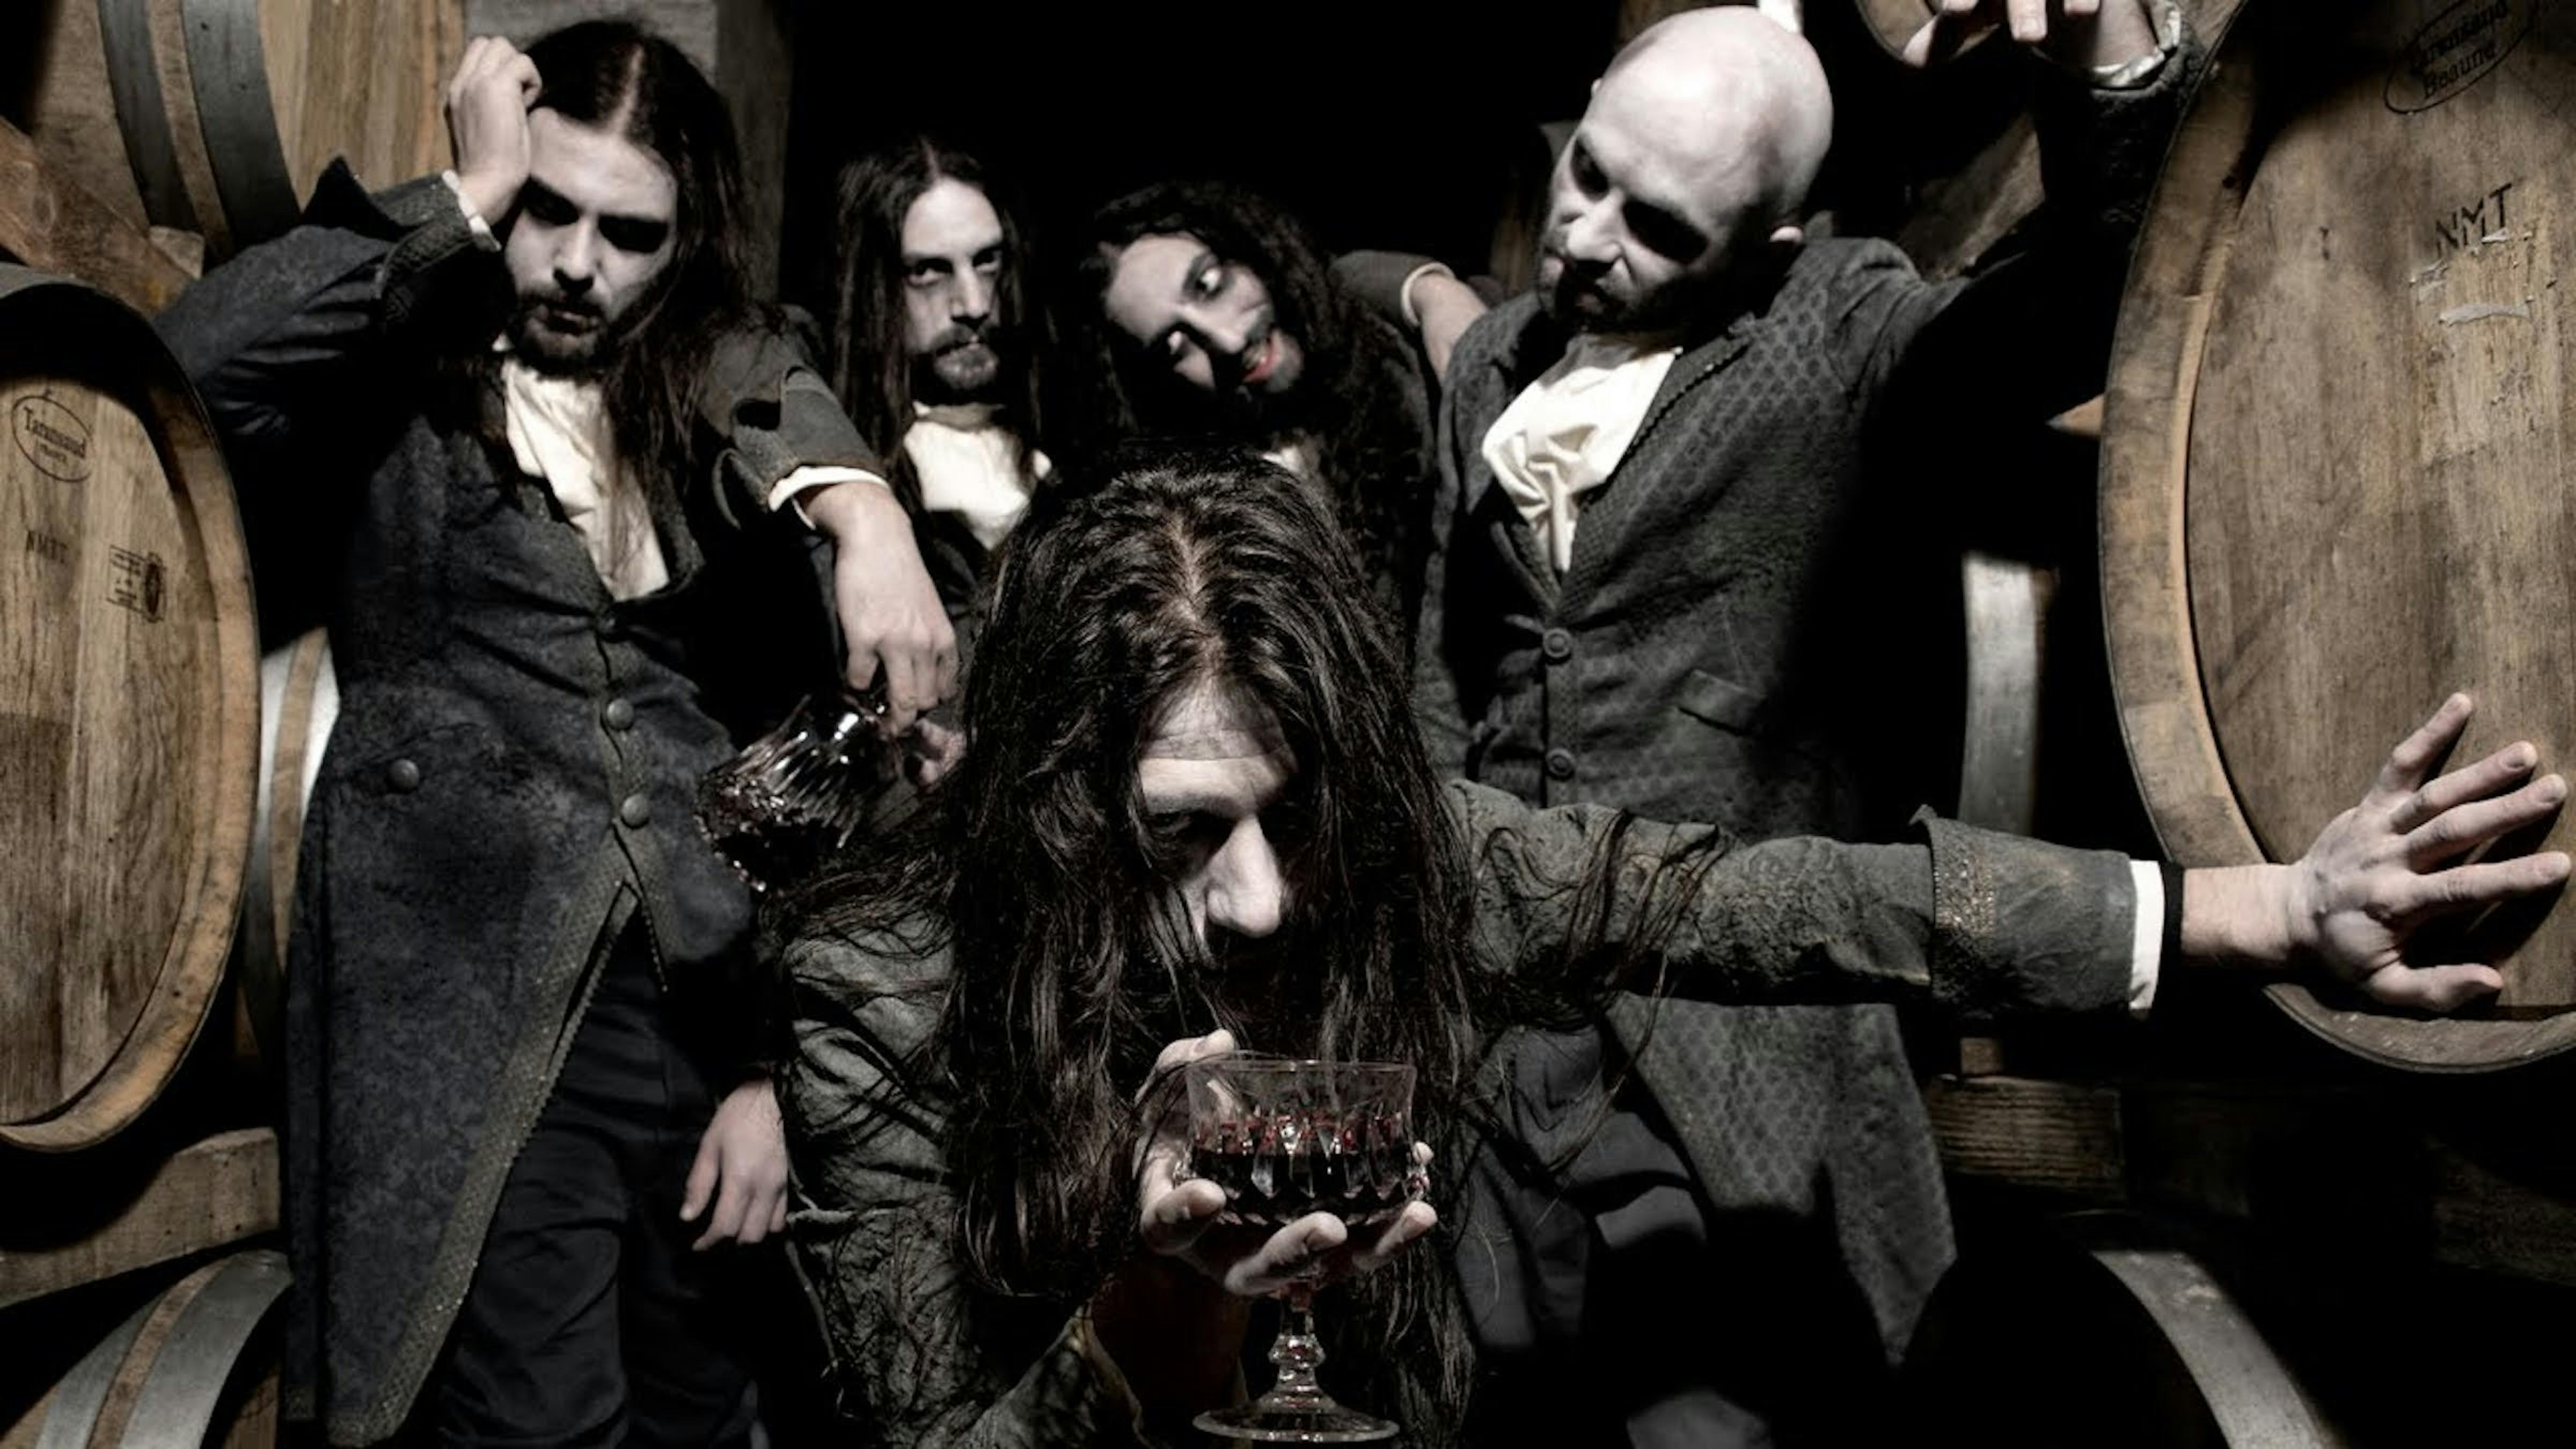 Fleshgod Apocalypse Announce North American Tour Featuring Classical